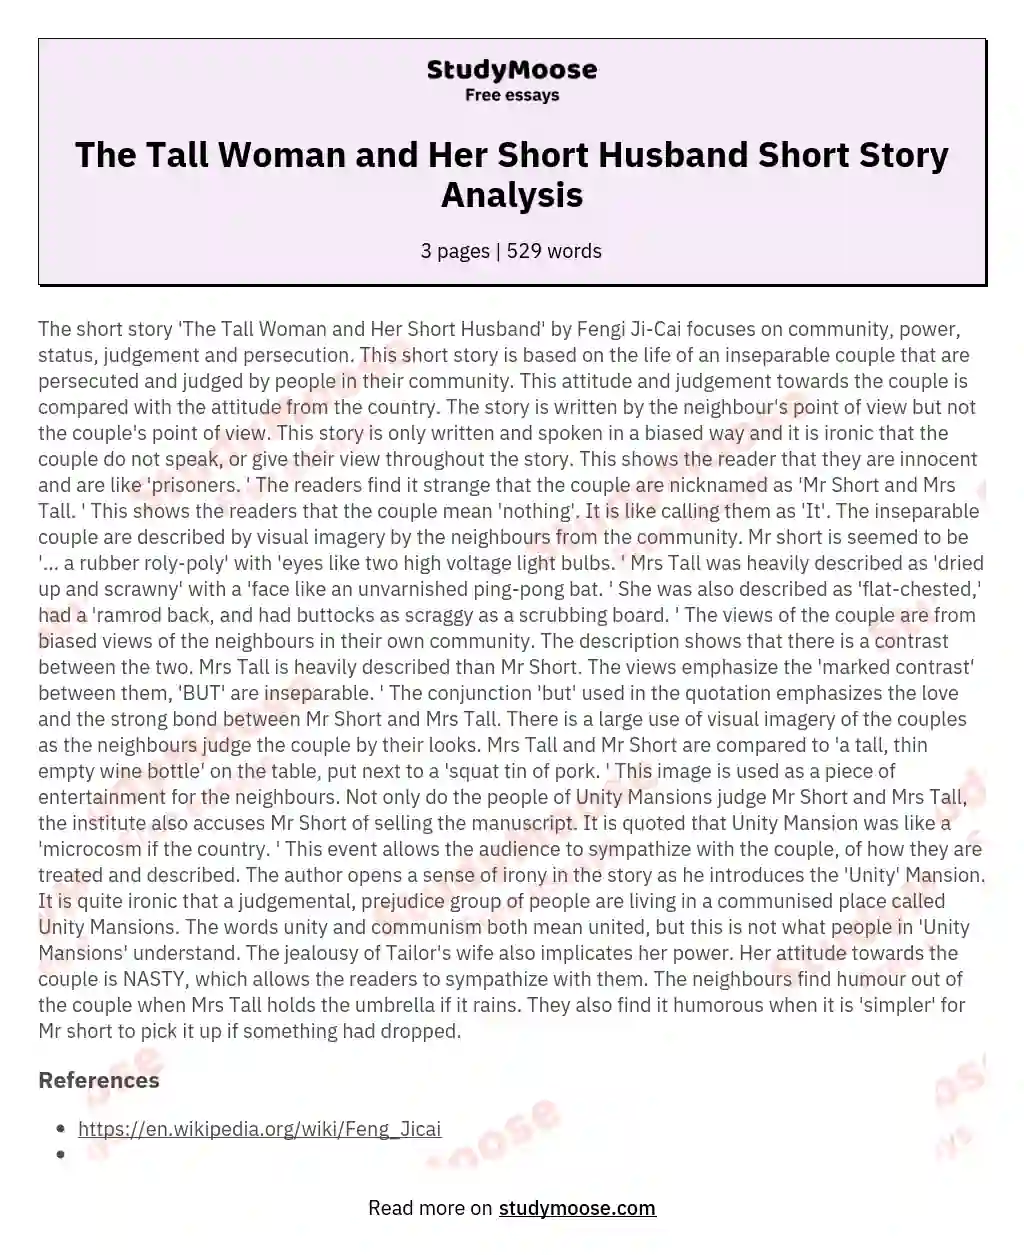 The Tall Woman and Her Short Husband Short Story Analysis essay